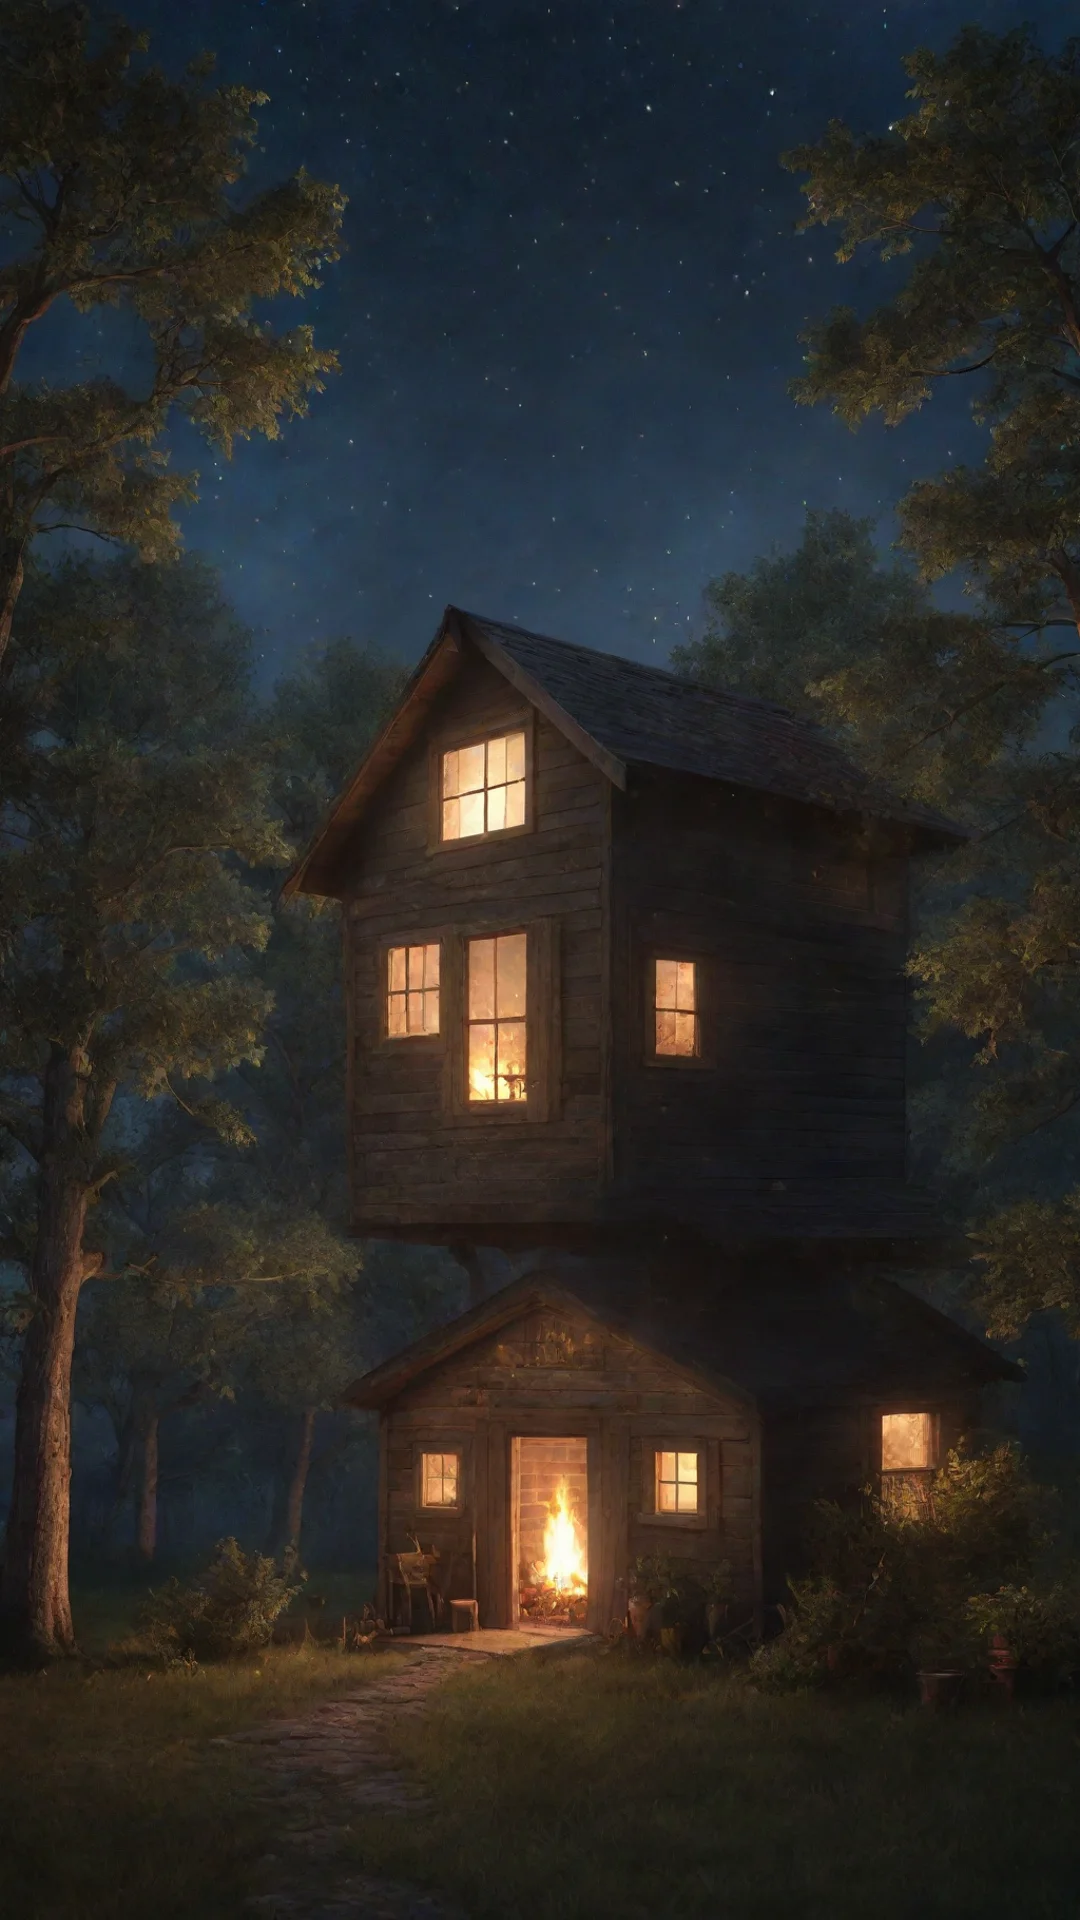 aitrending night time shed with stars and trees with a warm glow from the windows and a smoking fire. magical and hyper realistic good looking fantastic 1 tall